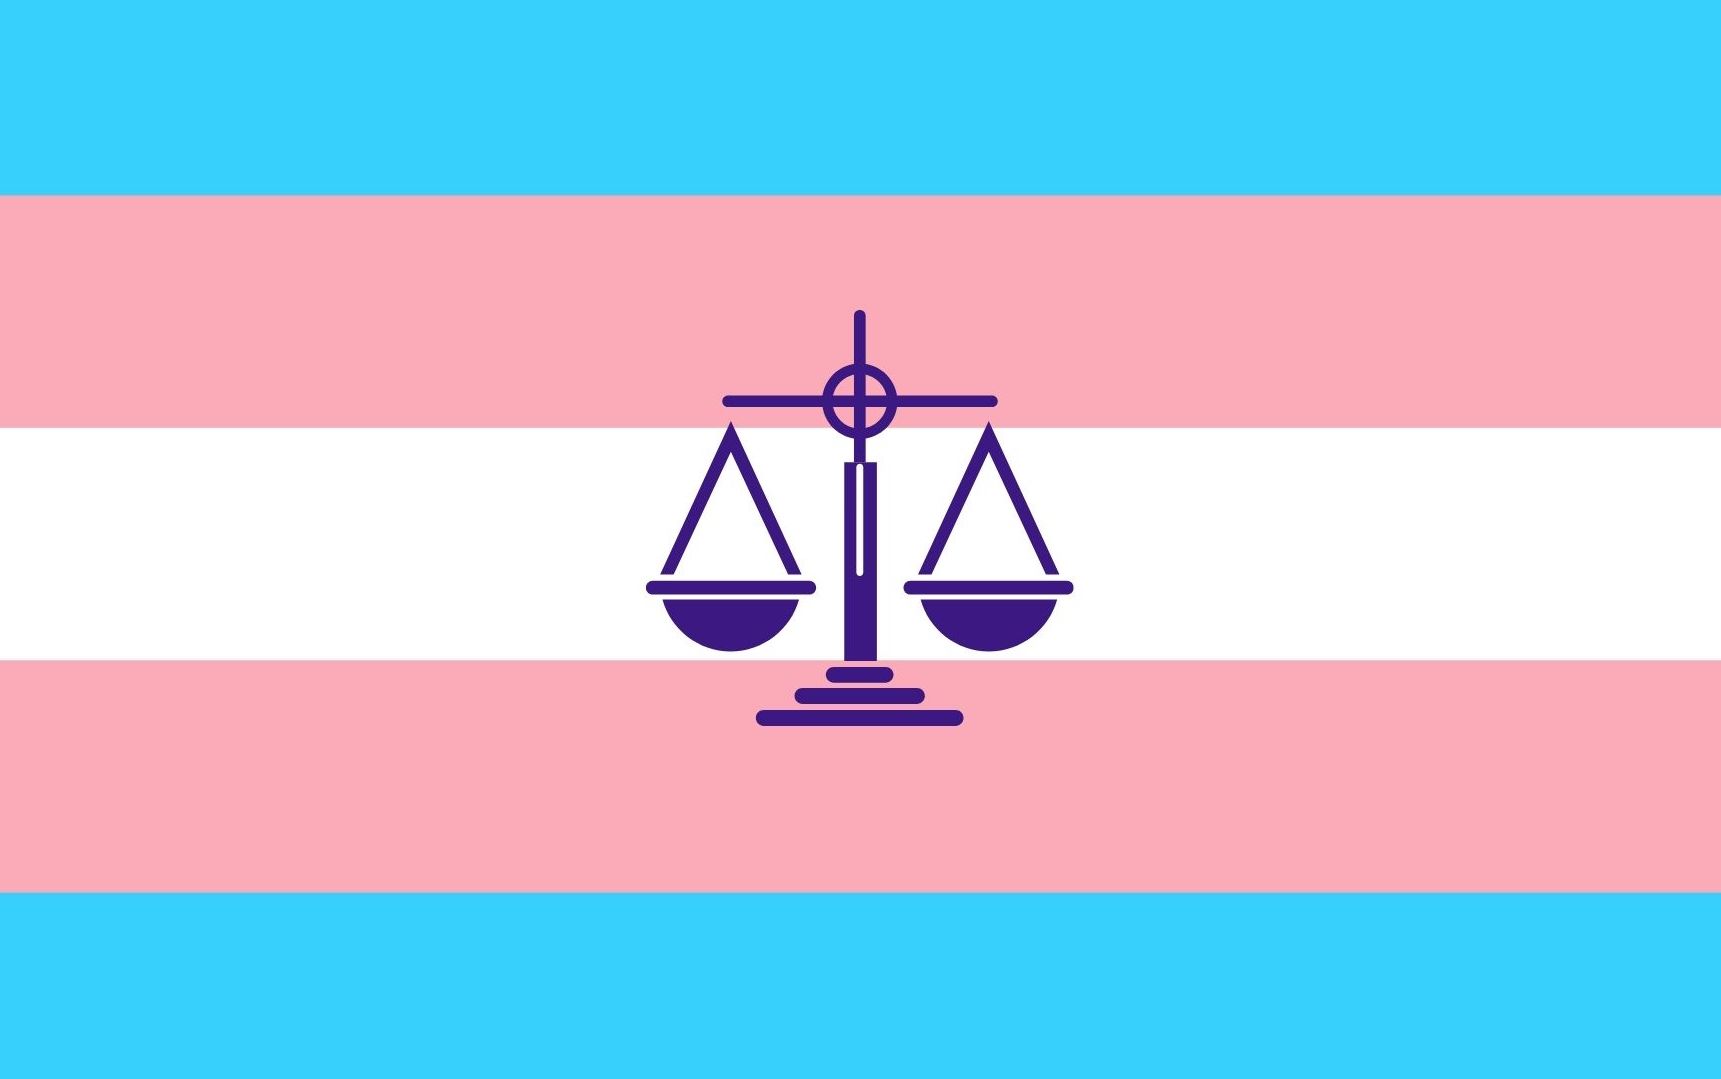 Blue, pink, and white strips of the trans pride flag with justice scales overlaid.